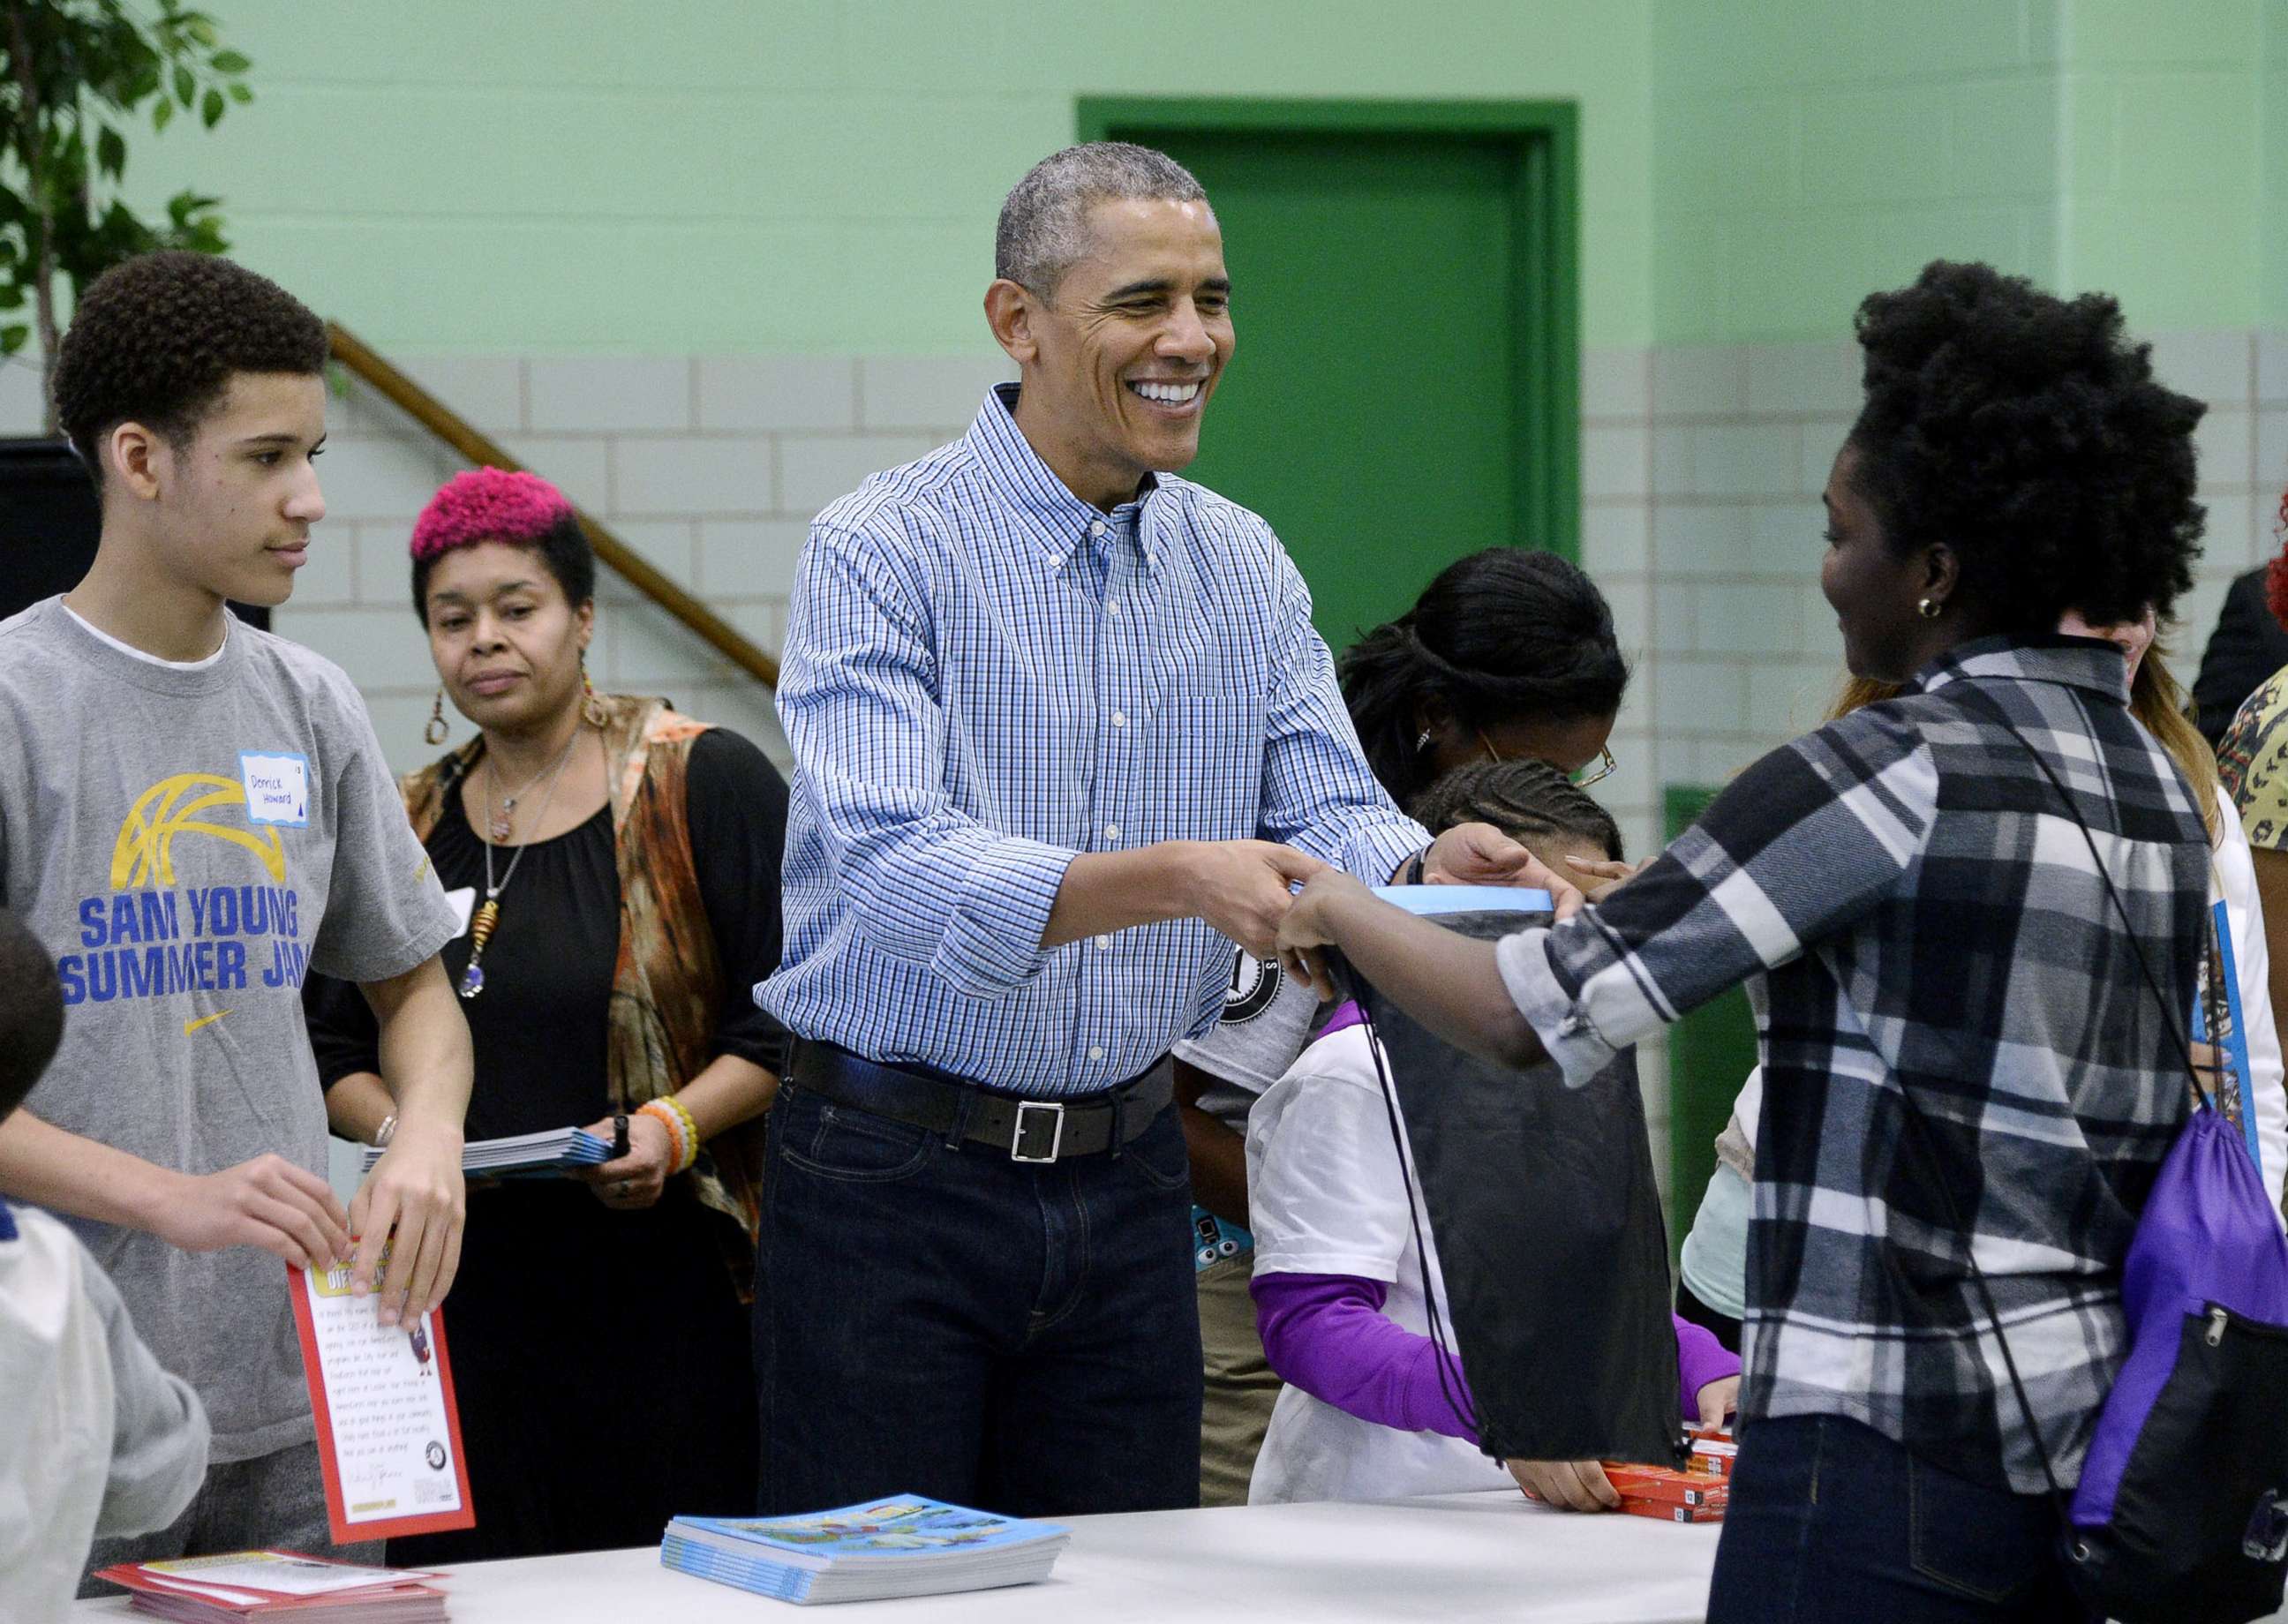 PHOTO: President Barack Obama participates in a community service project at Leckie Elementary school in celebration of the Martin Luther King, Jr. Day of Service and in honor of Dr. King's life and legacy, Jan. 18, 2016 in Washington, DC. 